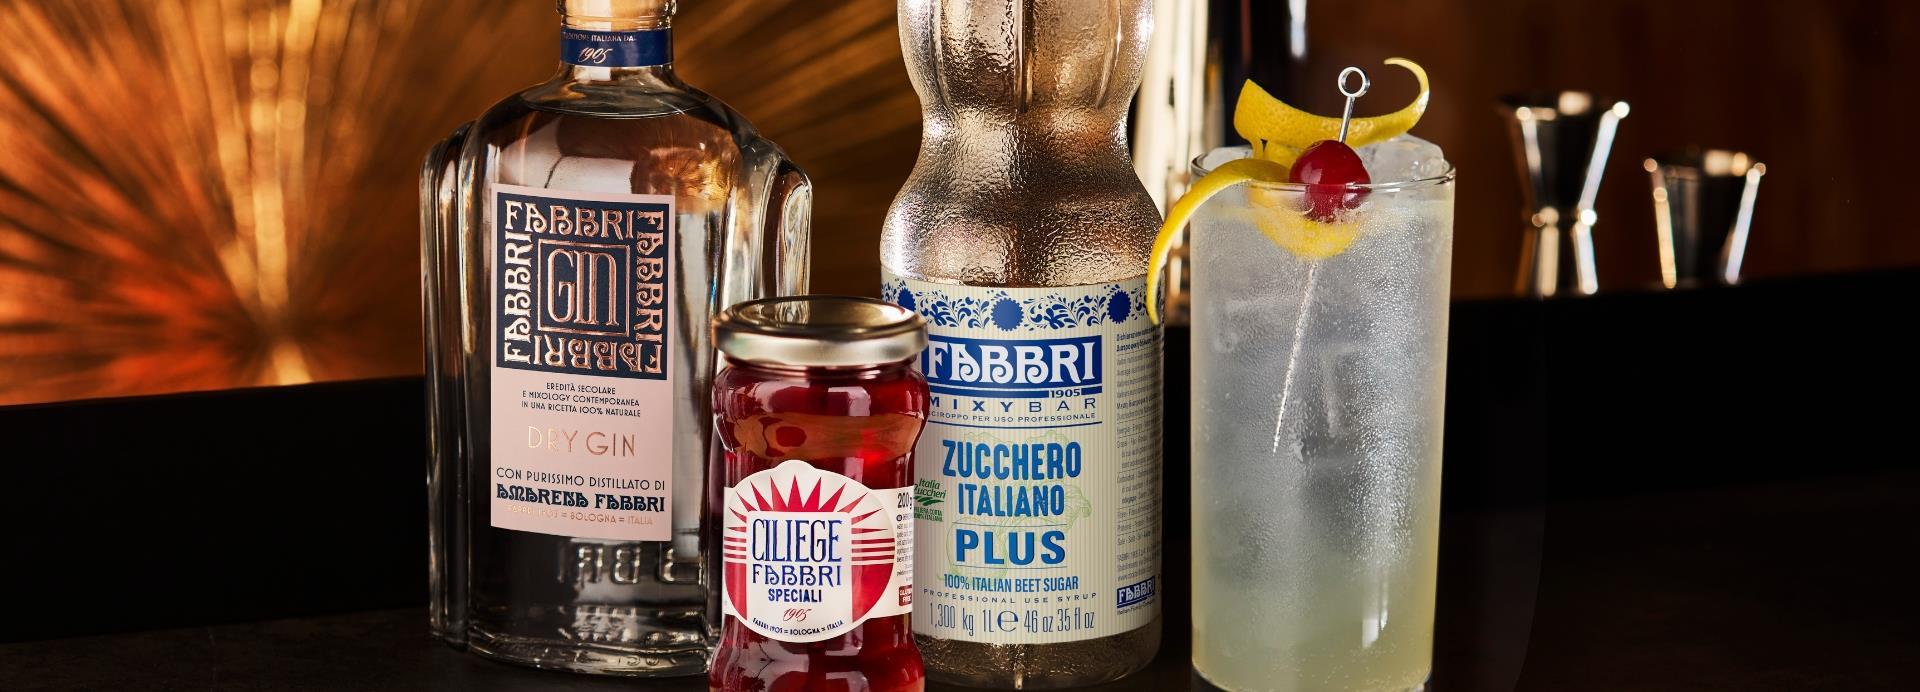 The brand new Fabbri GINs and Fabbri Special Cherries now available online!